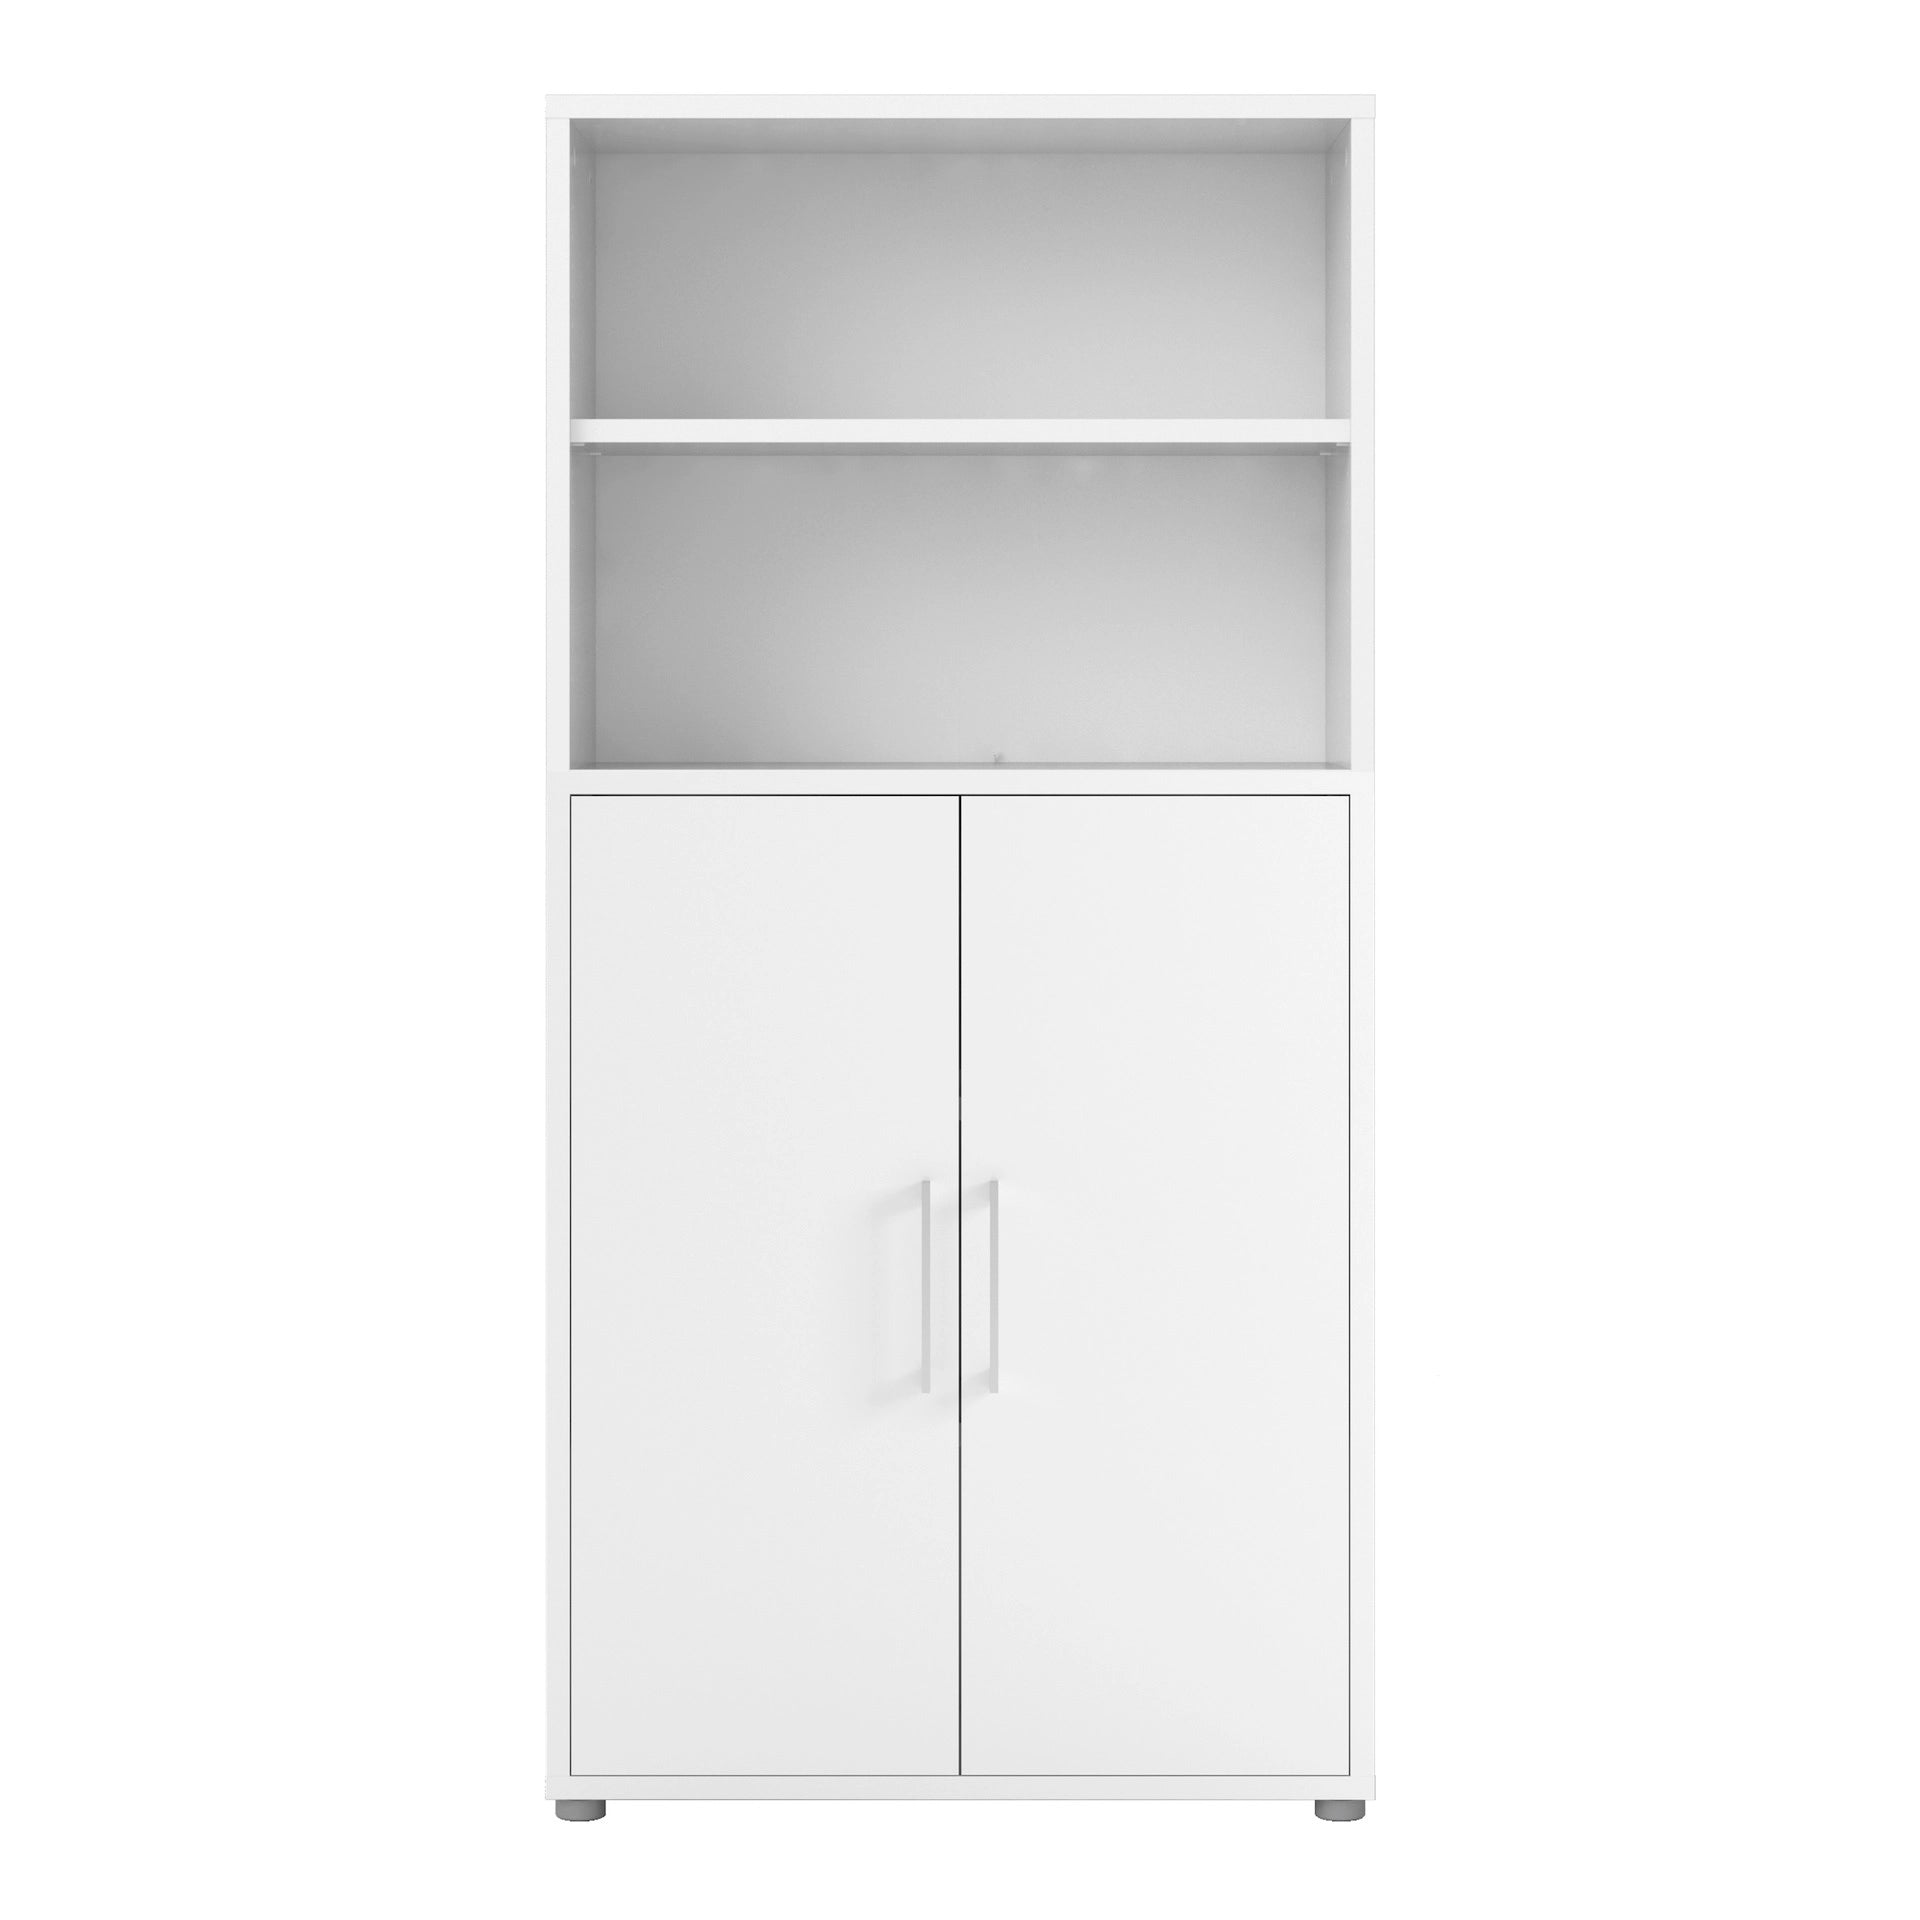 Furniture To Go Prima Bookcase 3 Shelves with 2 Doors in White